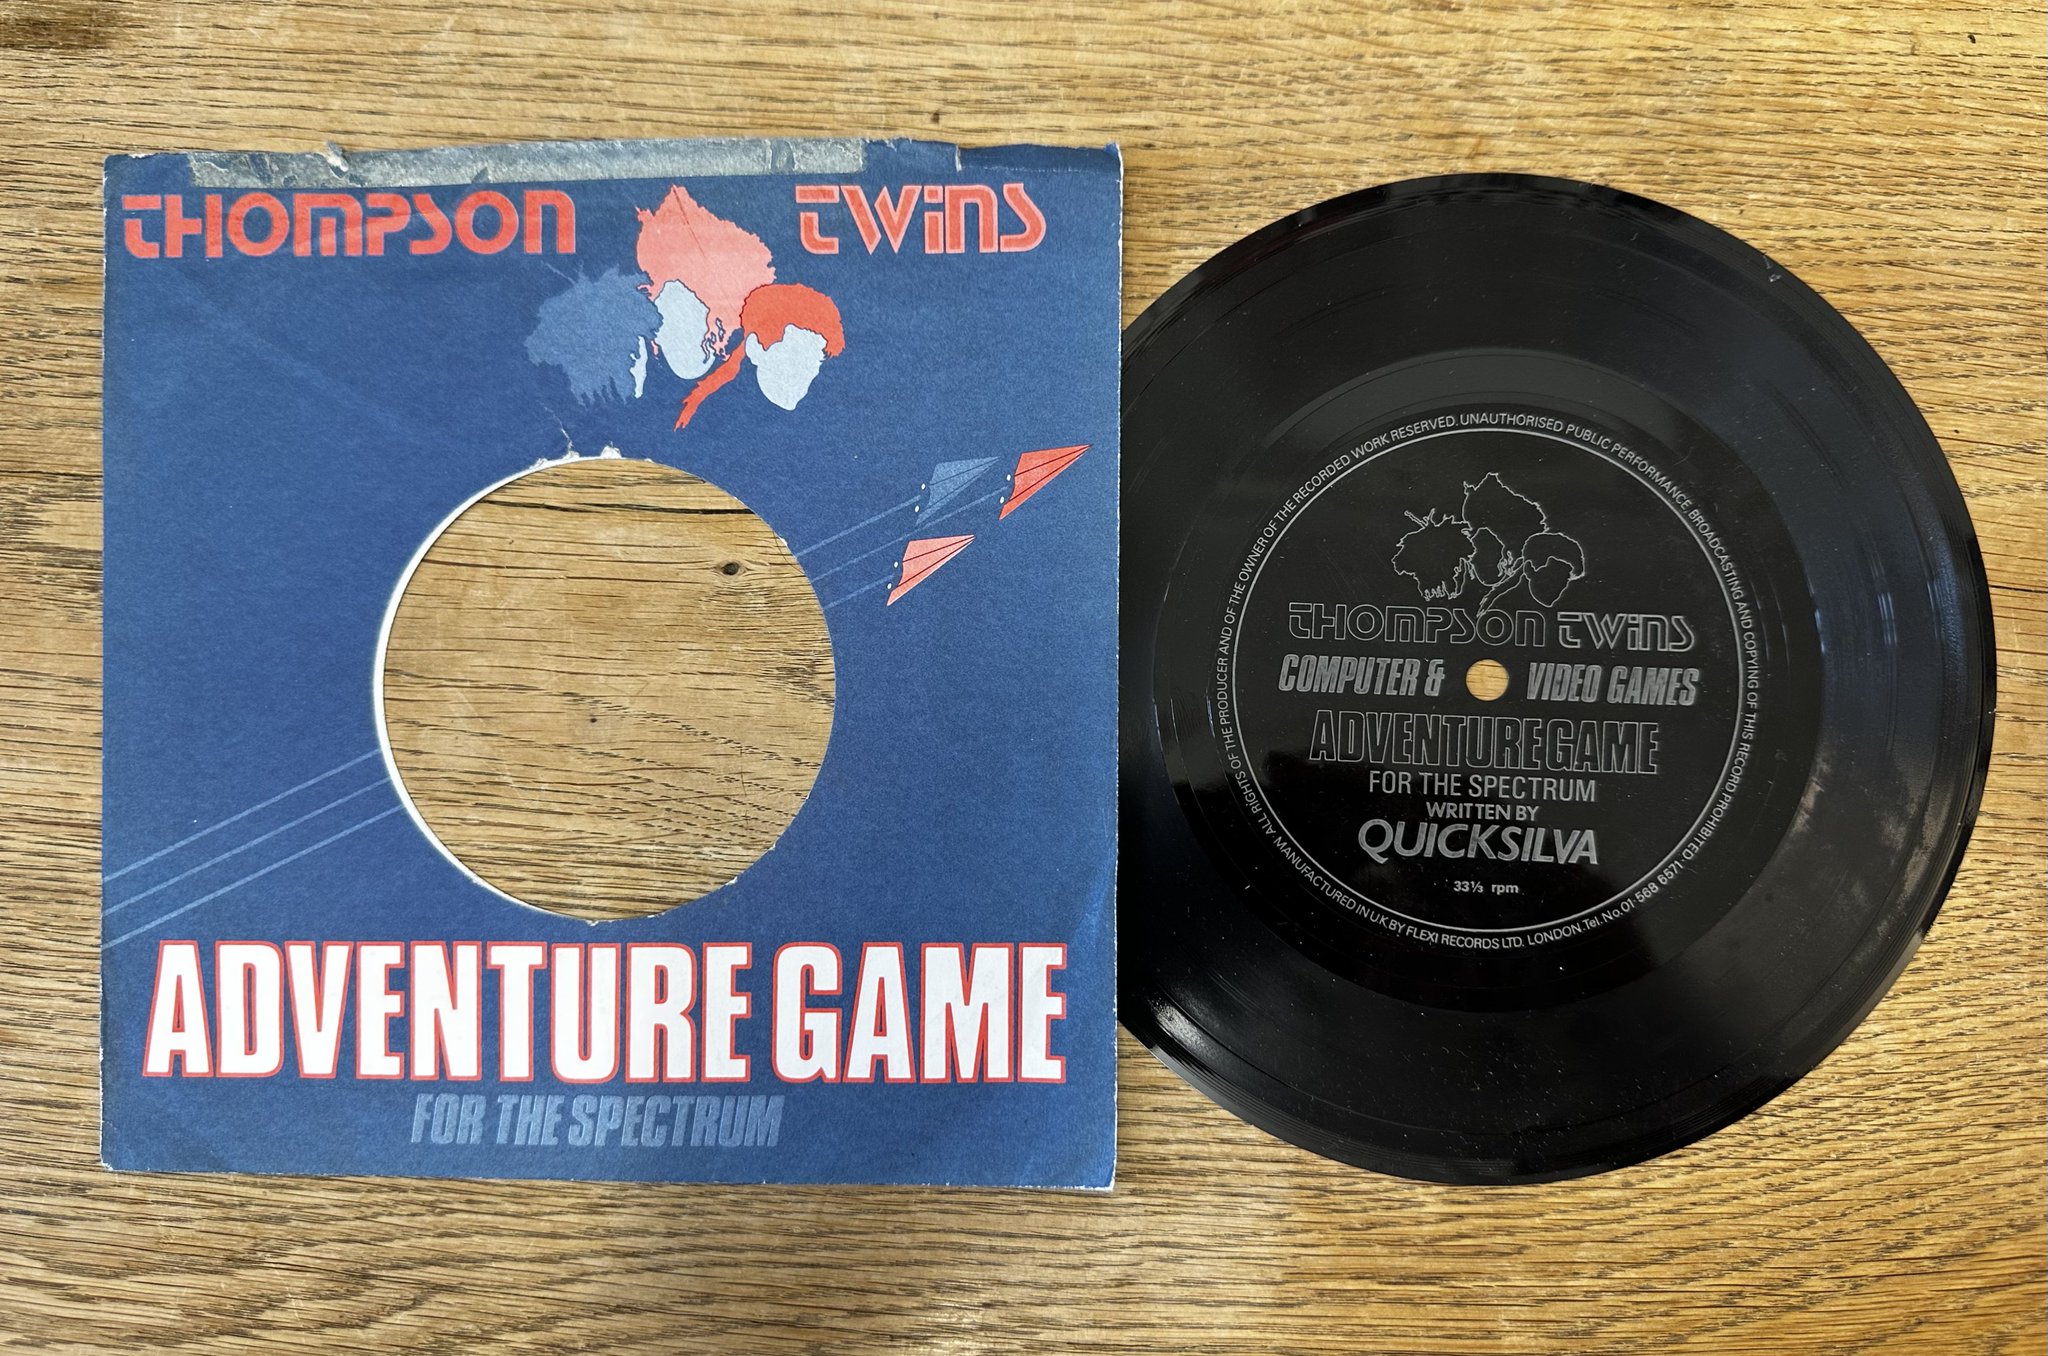 Trevor Jackson on X: "In 1983 the Thompson Twins released a ZX Spectrum  adventure game you had to load off of a 7” flexidisc.  https://t.co/7dhyISarVZ" / X